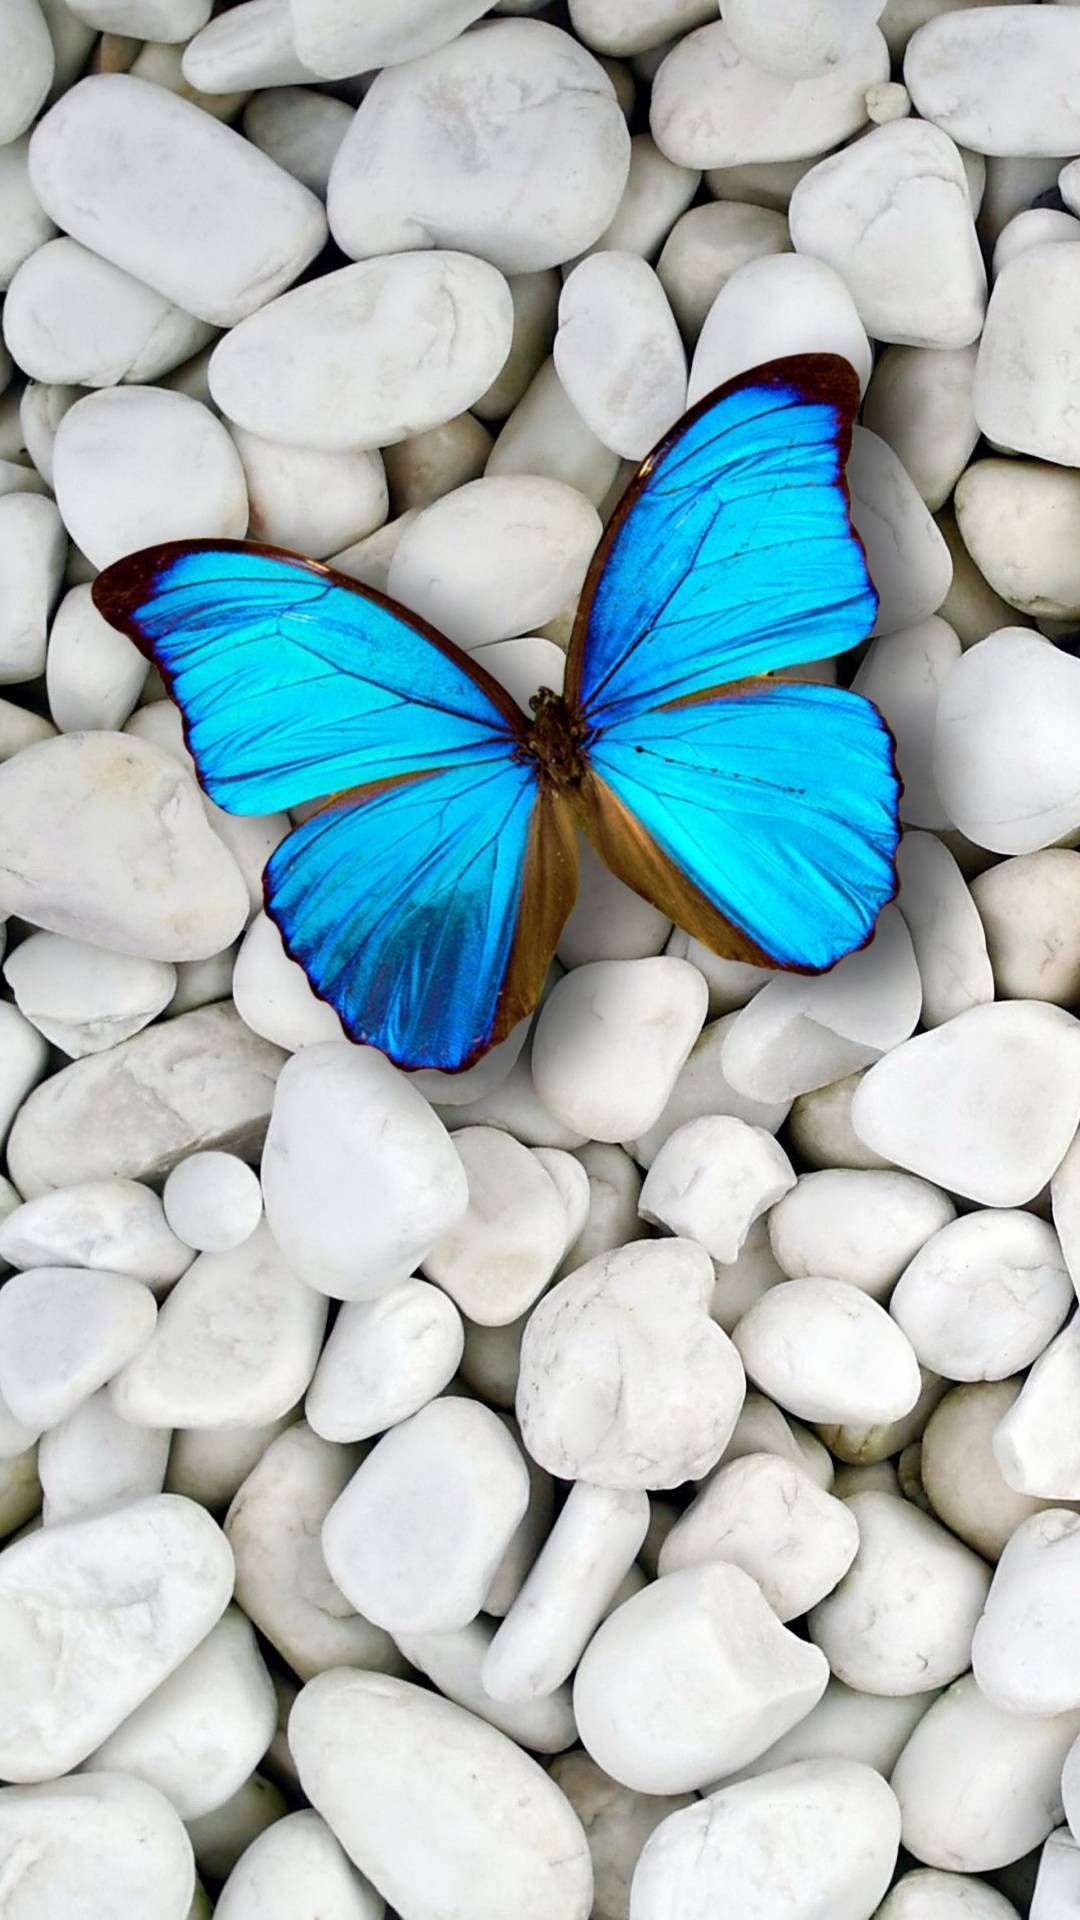 Blue Butterfly Wallpaper For iPhone resolution 1080x1920. Blue butterfly wallpaper, Butterfly wallpaper iphone, Blue wallpaper iphone